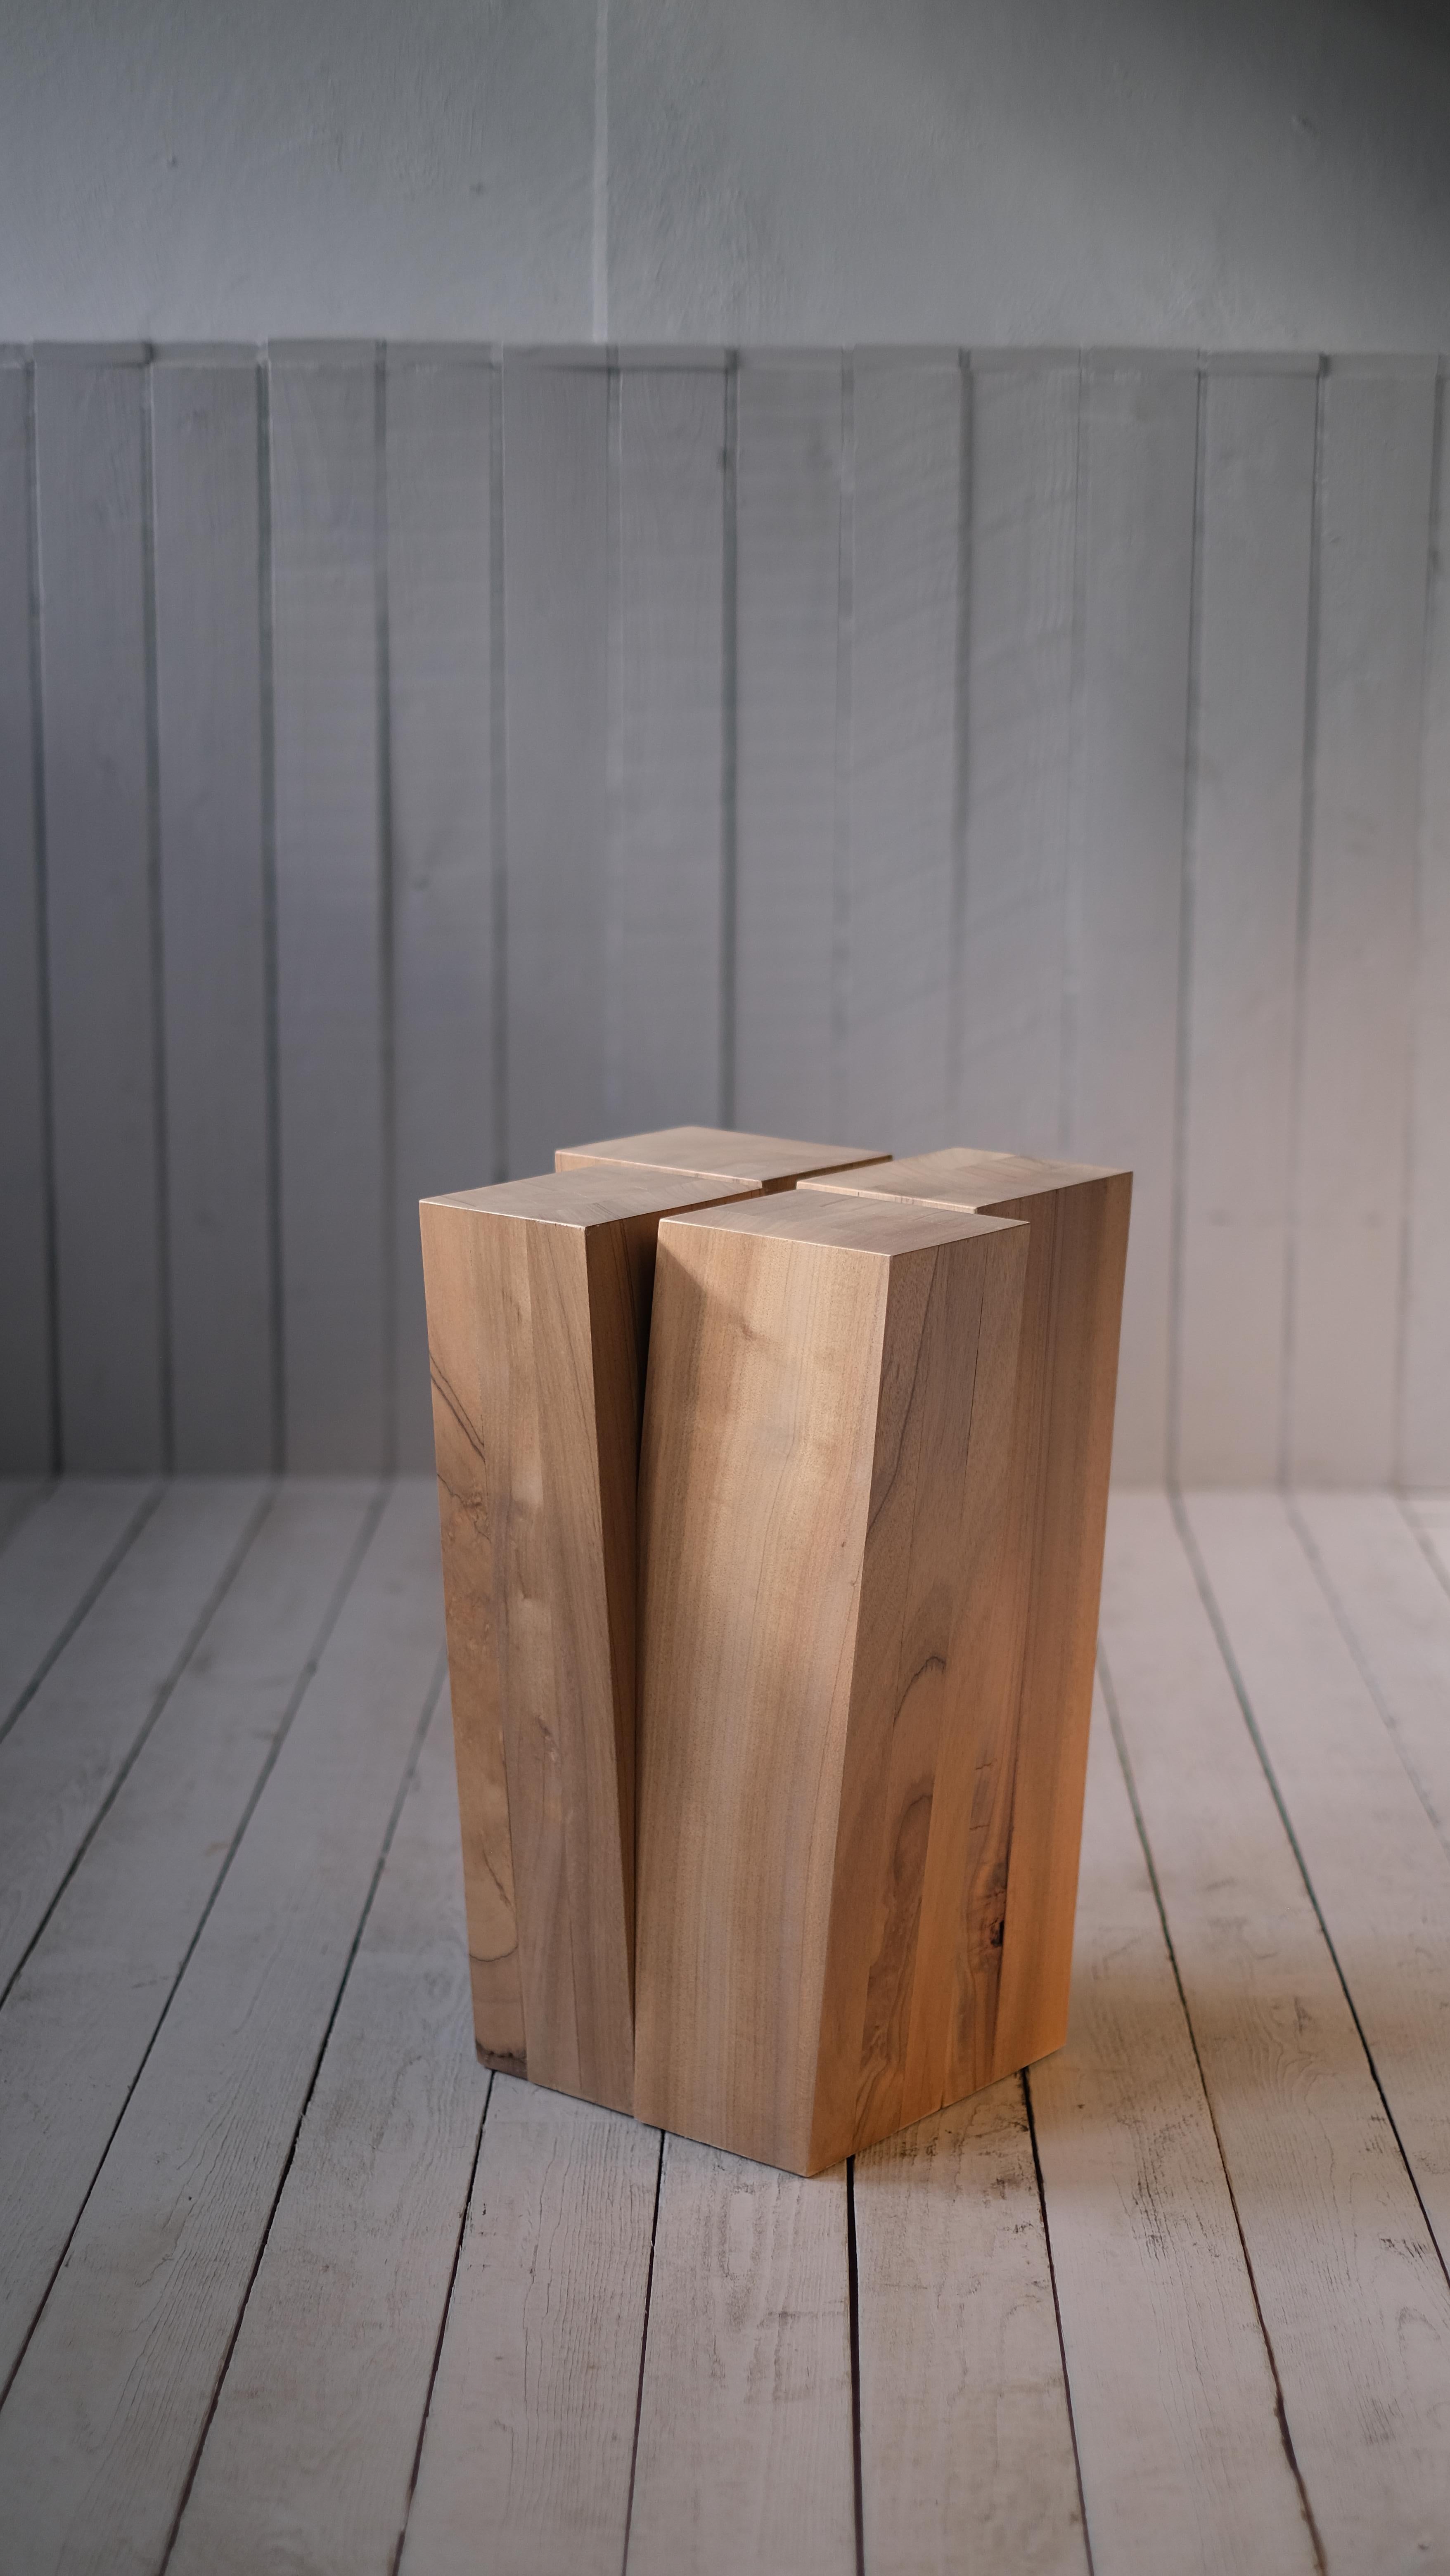 Four legs stool naturel by Arno Declercq
Dimensions: W 32 x D 32 x H 50 cm 
Materials: African walnut

Arno Declercq
Belgian designer and art dealer who makes bespoke objects with passion for design, atmosphere, history and craft. Arno grew up